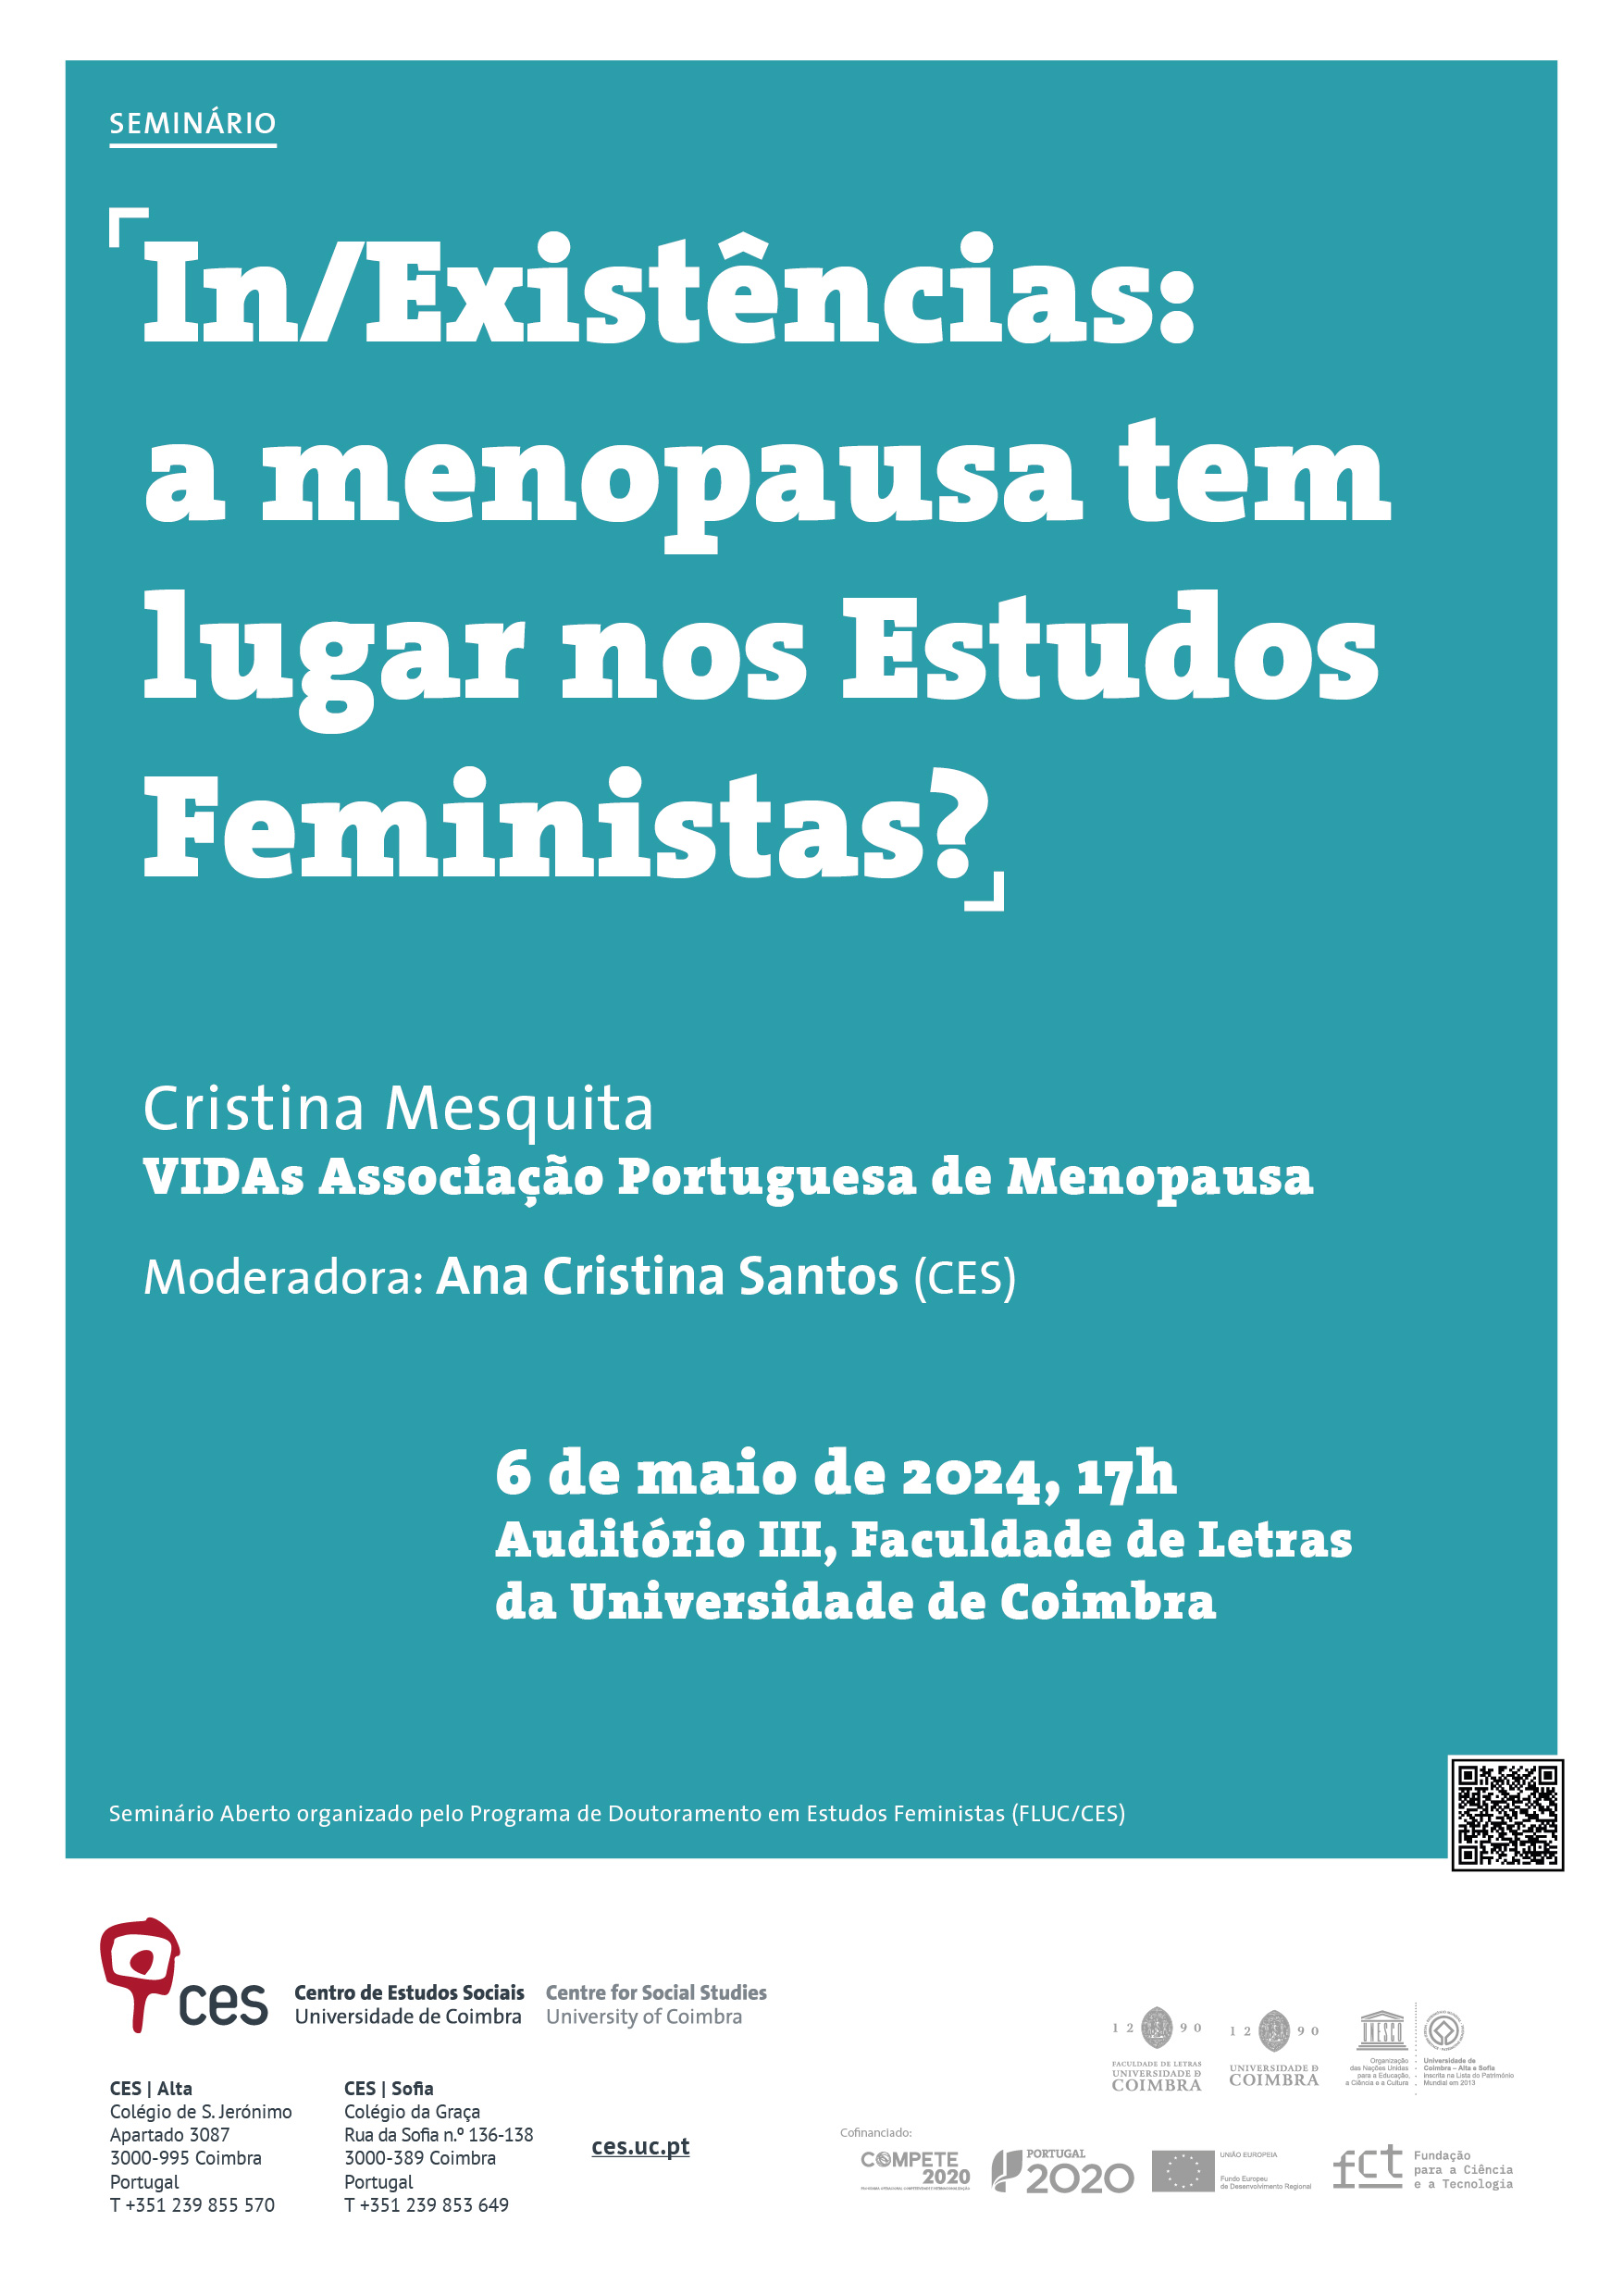 In/Existences: does the menopause have a place in Feminist Studies?<span id="edit_45562"><script>$(function() { $('#edit_45562').load( "/myces/user/editobj.php?tipo=evento&id=45562" ); });</script></span>